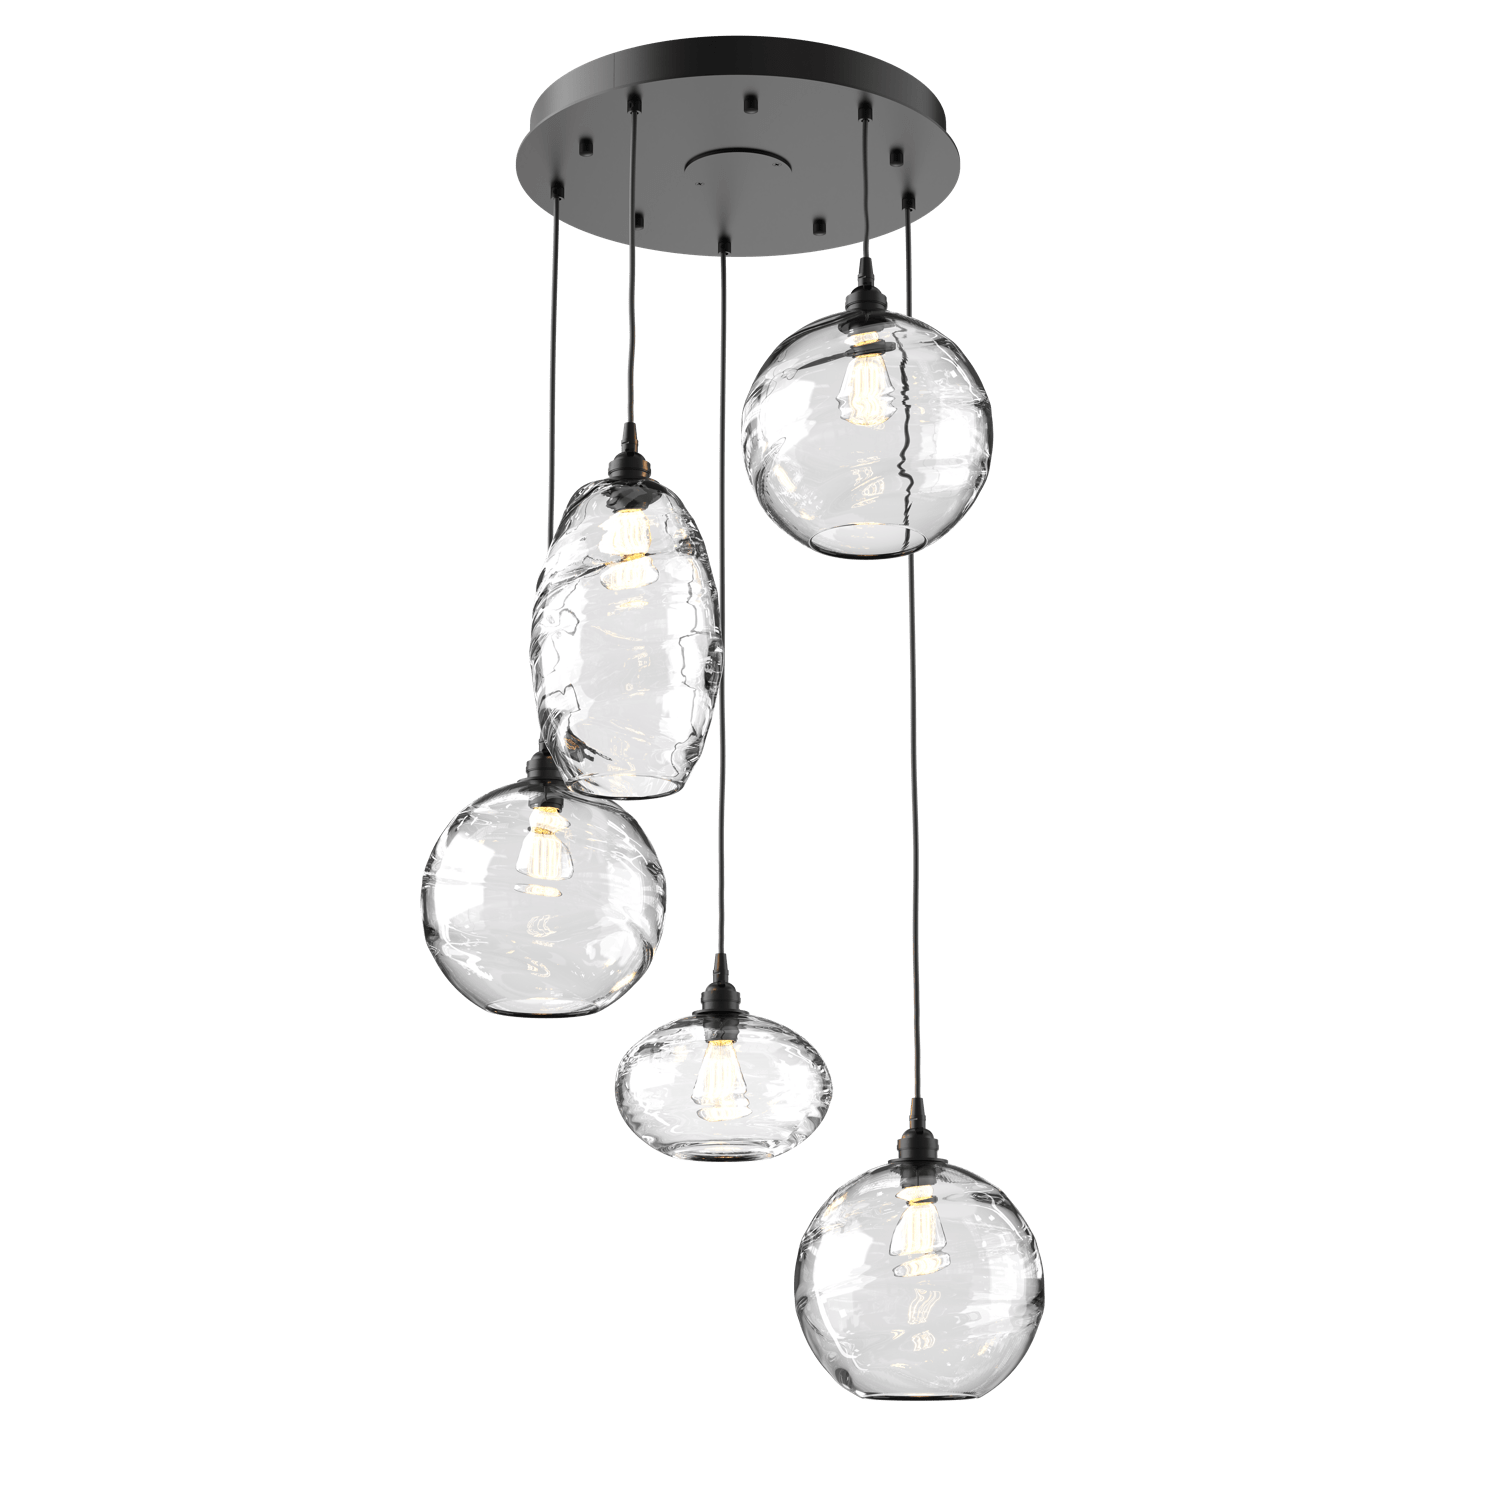 CHB0048-05-MB-OC-Hammerton-Studio-Optic-Blown-Glass-Misto-5-light-round-pendant-chandelier-with-matte-black-finish-and-optic-clear-blown-glass-shades-and-incandescent-lamping